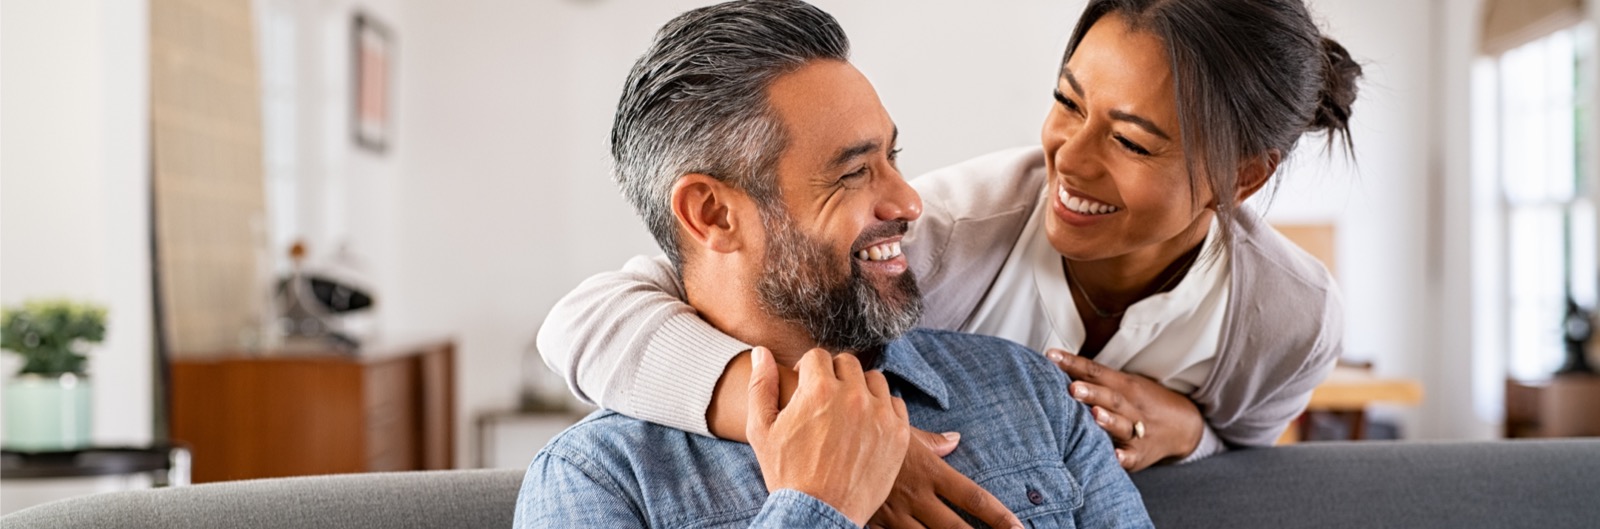 mature-multiethnic-couple-laughing-and-embracing-at-home-picture-1600x529.jpg